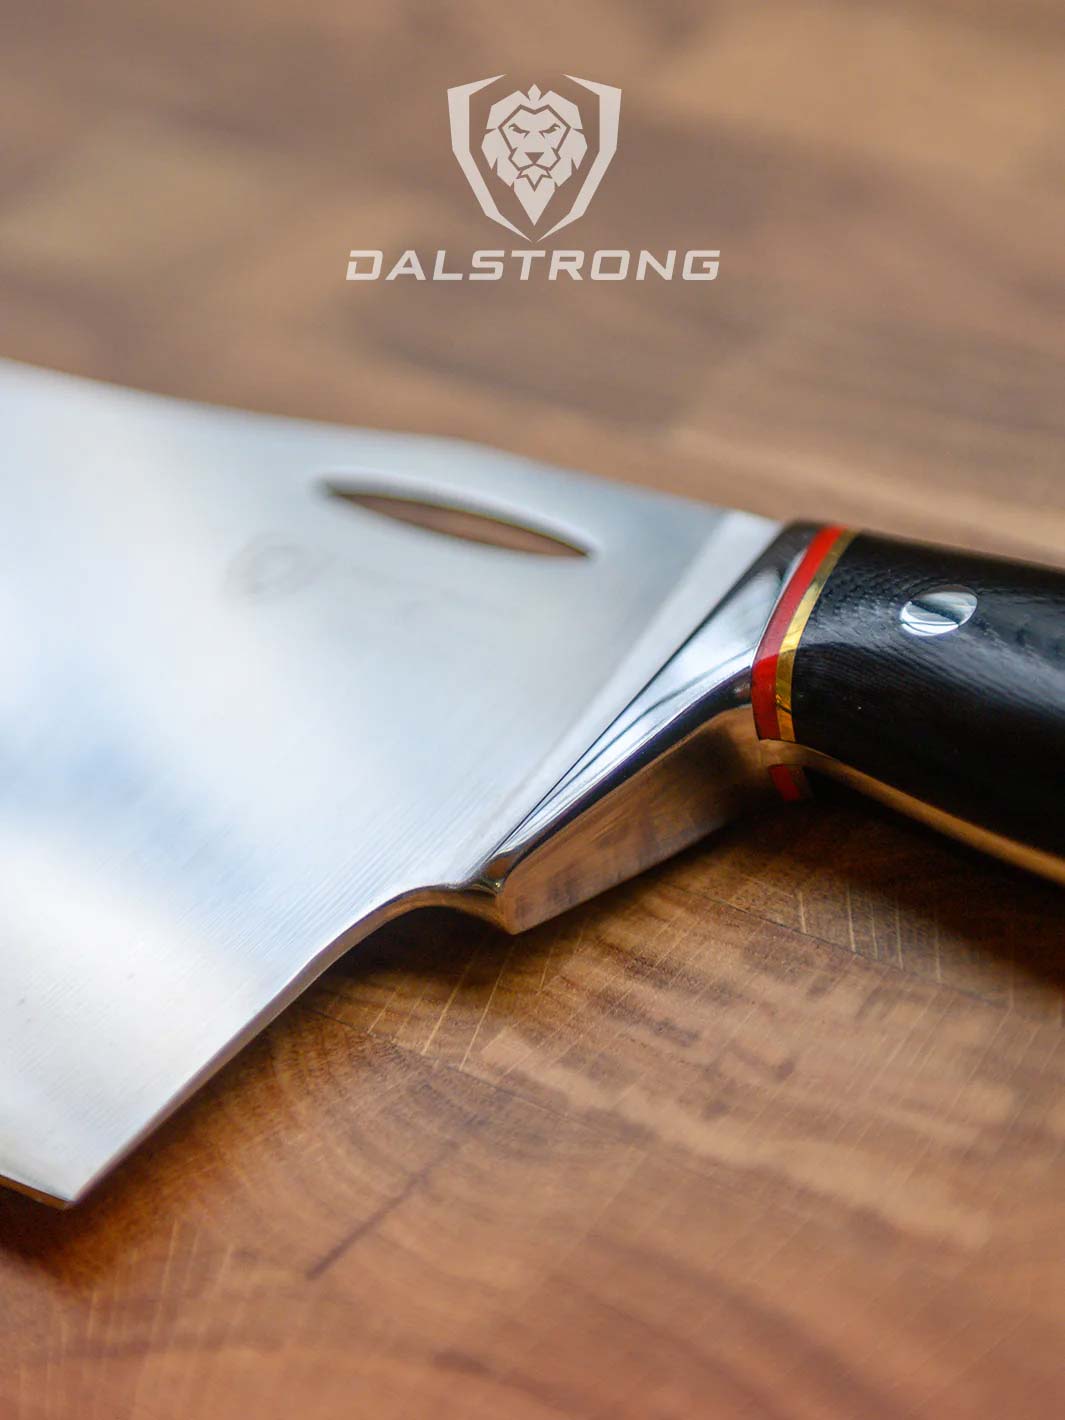 Dalstrong centurion series 7 inch cleaver knife showcasing it's black handle.